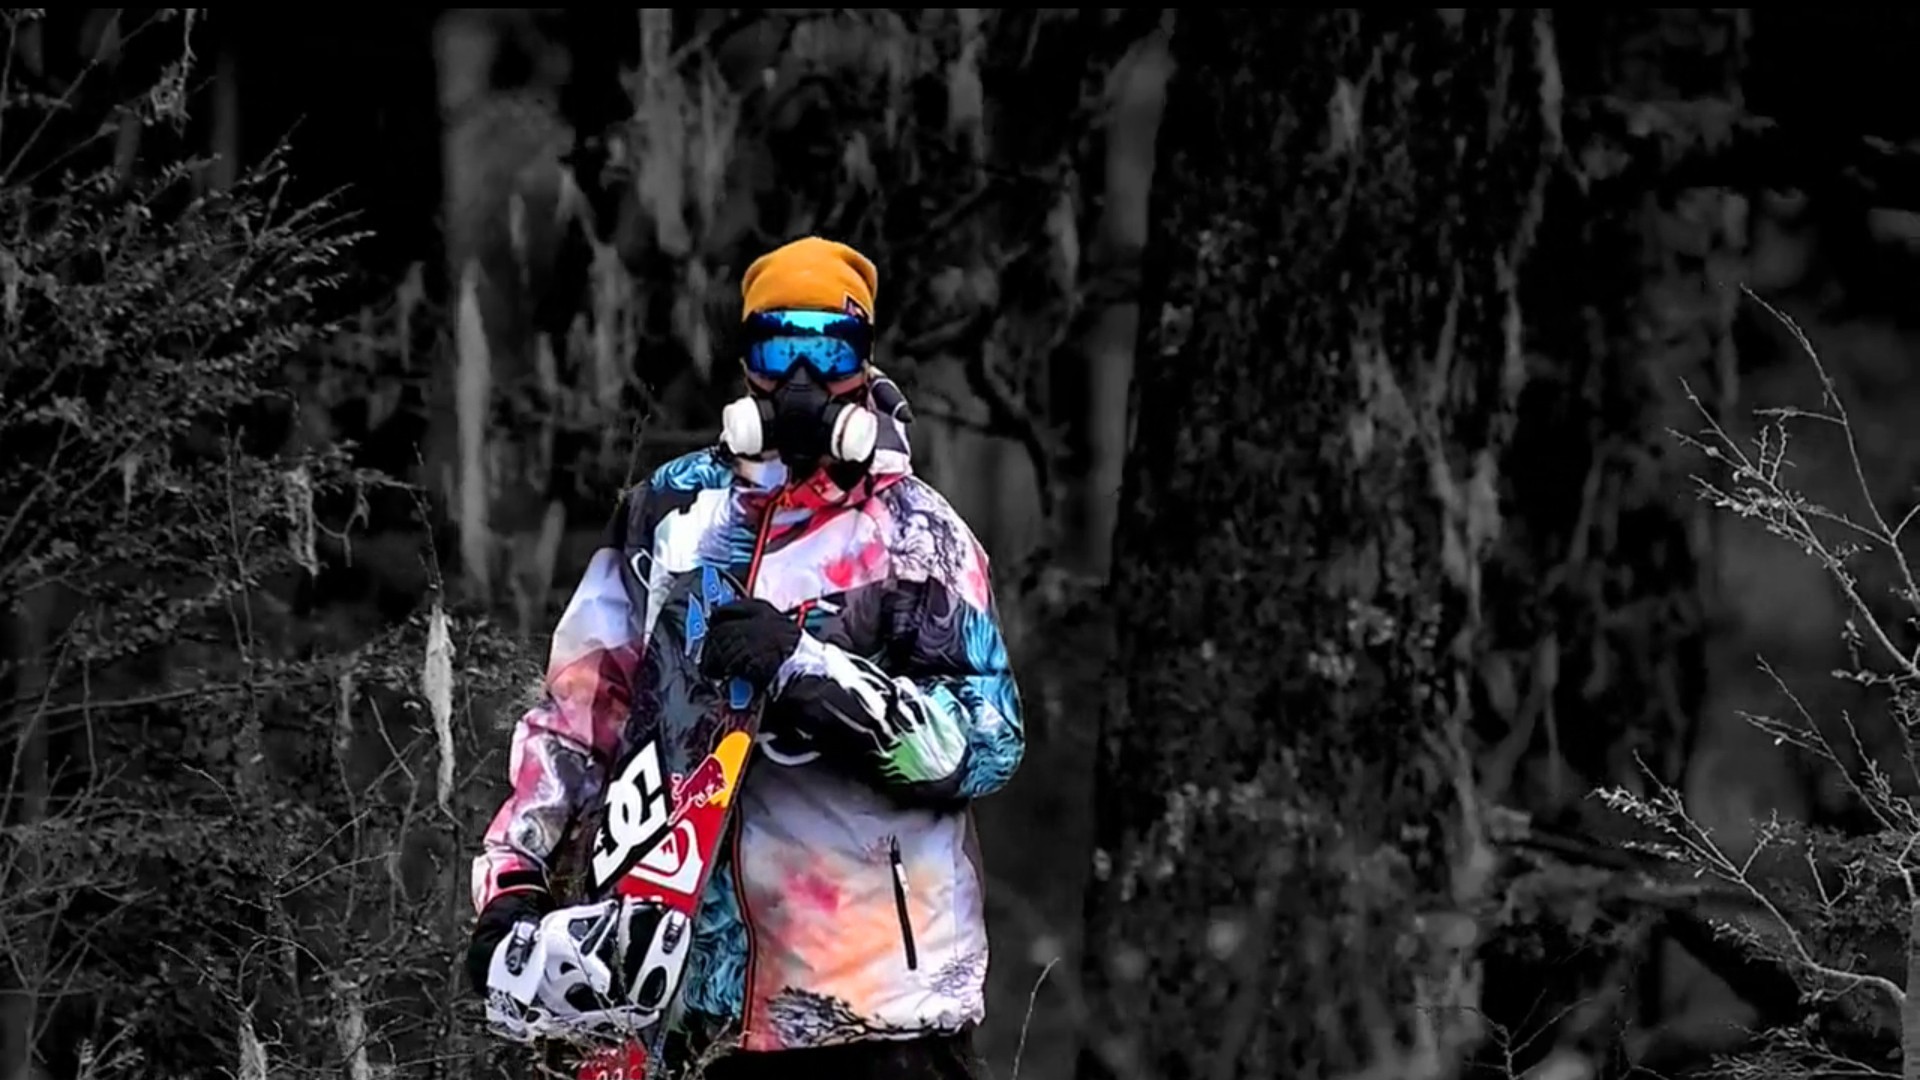 1920x1080 Colorful Burton Snowboards Wallpapers, Colorful Burton Snowboards .